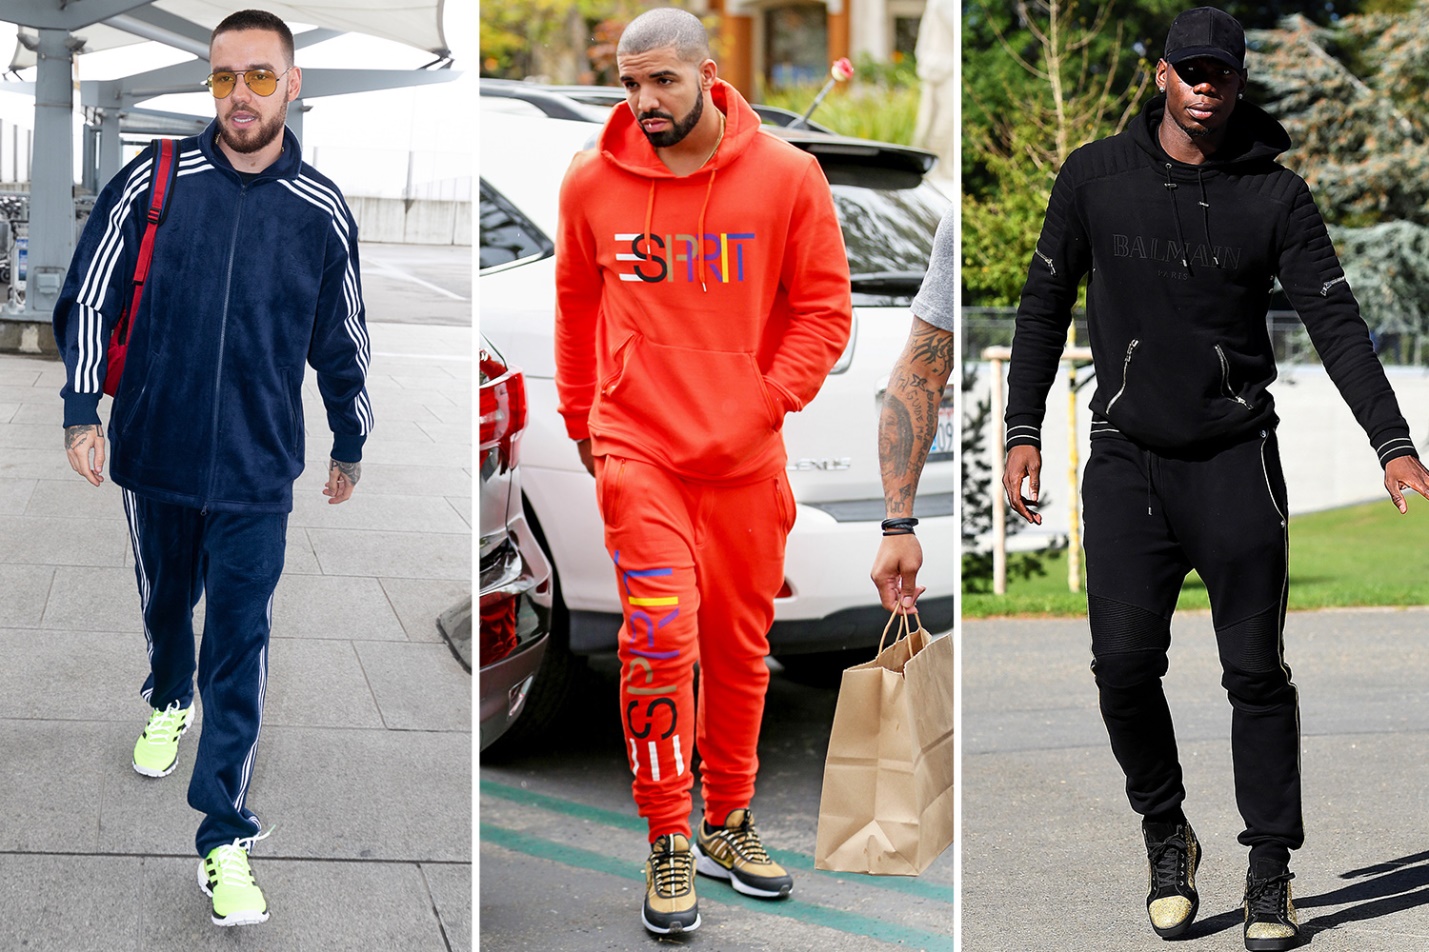 The stylish comfort of the men's tracksuit